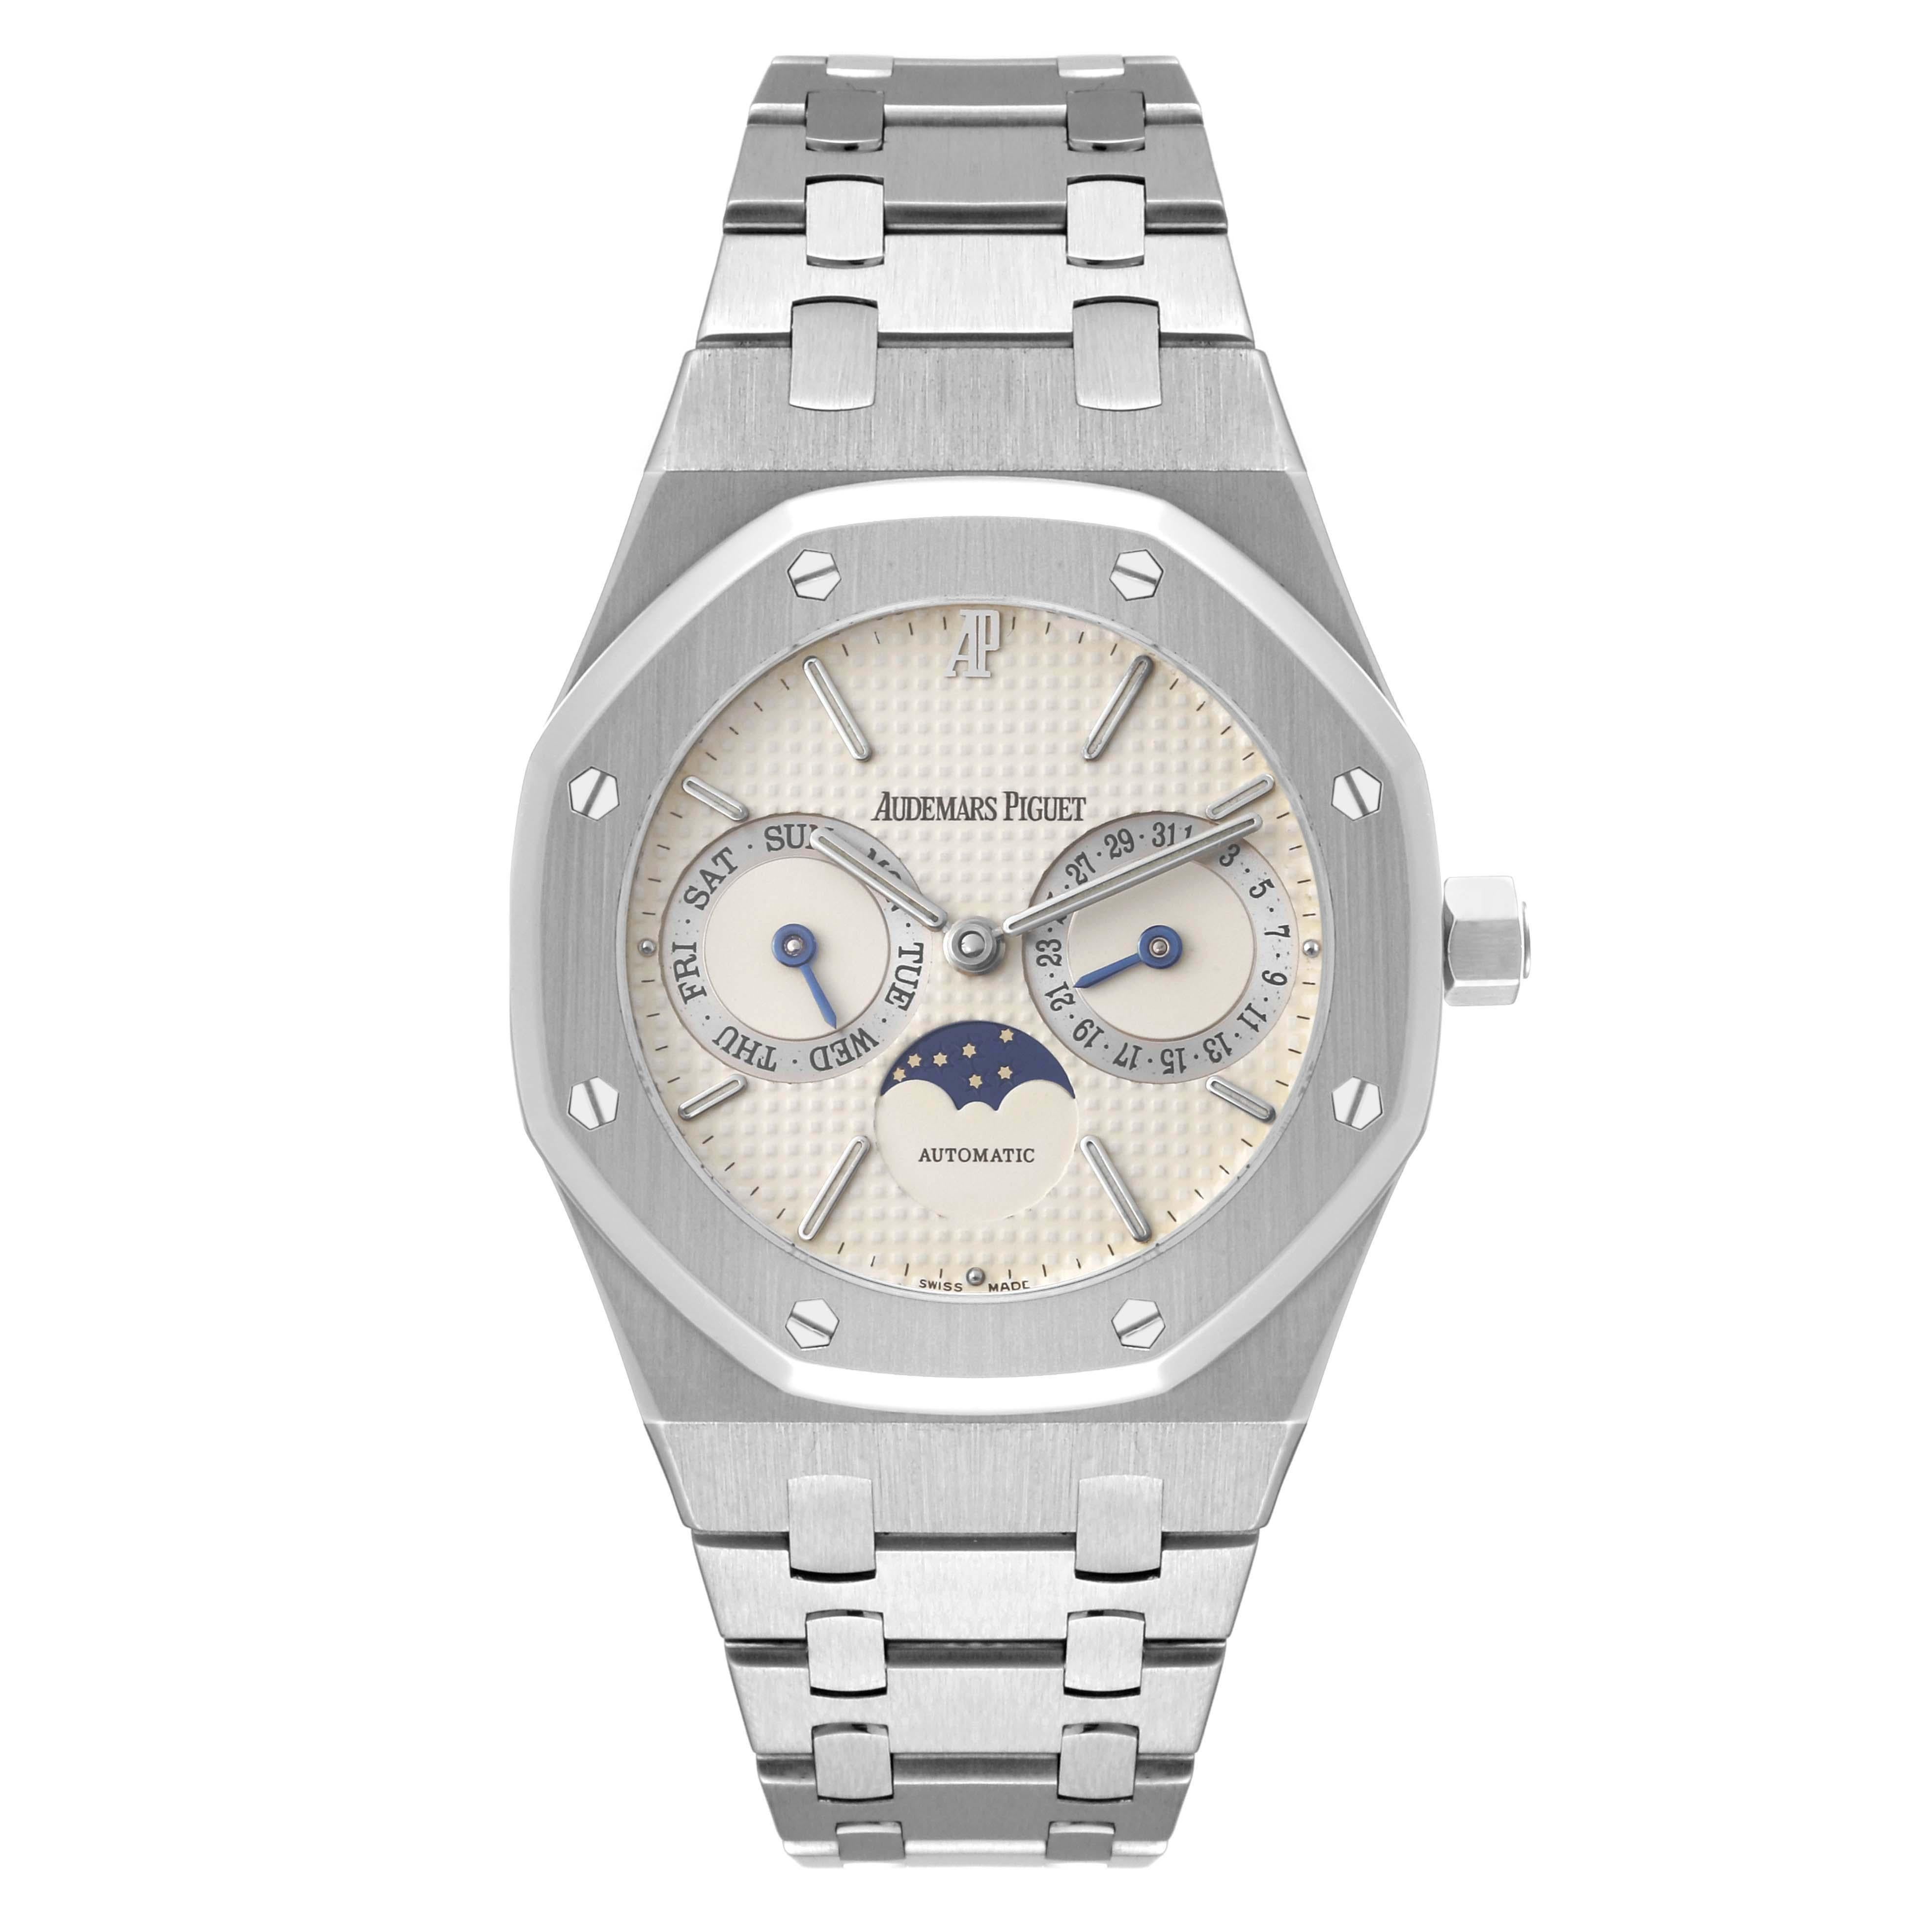 Audemars Piguet Royal Oak Steel Day Date Moonphase Mens Watch 25594ST. Automatic self-winding movement. Stainless steel case 36.0 mm in diameter. Stainless steel bezel punctuated with 8 signature screws. Scratch resistant sapphire crystal. White